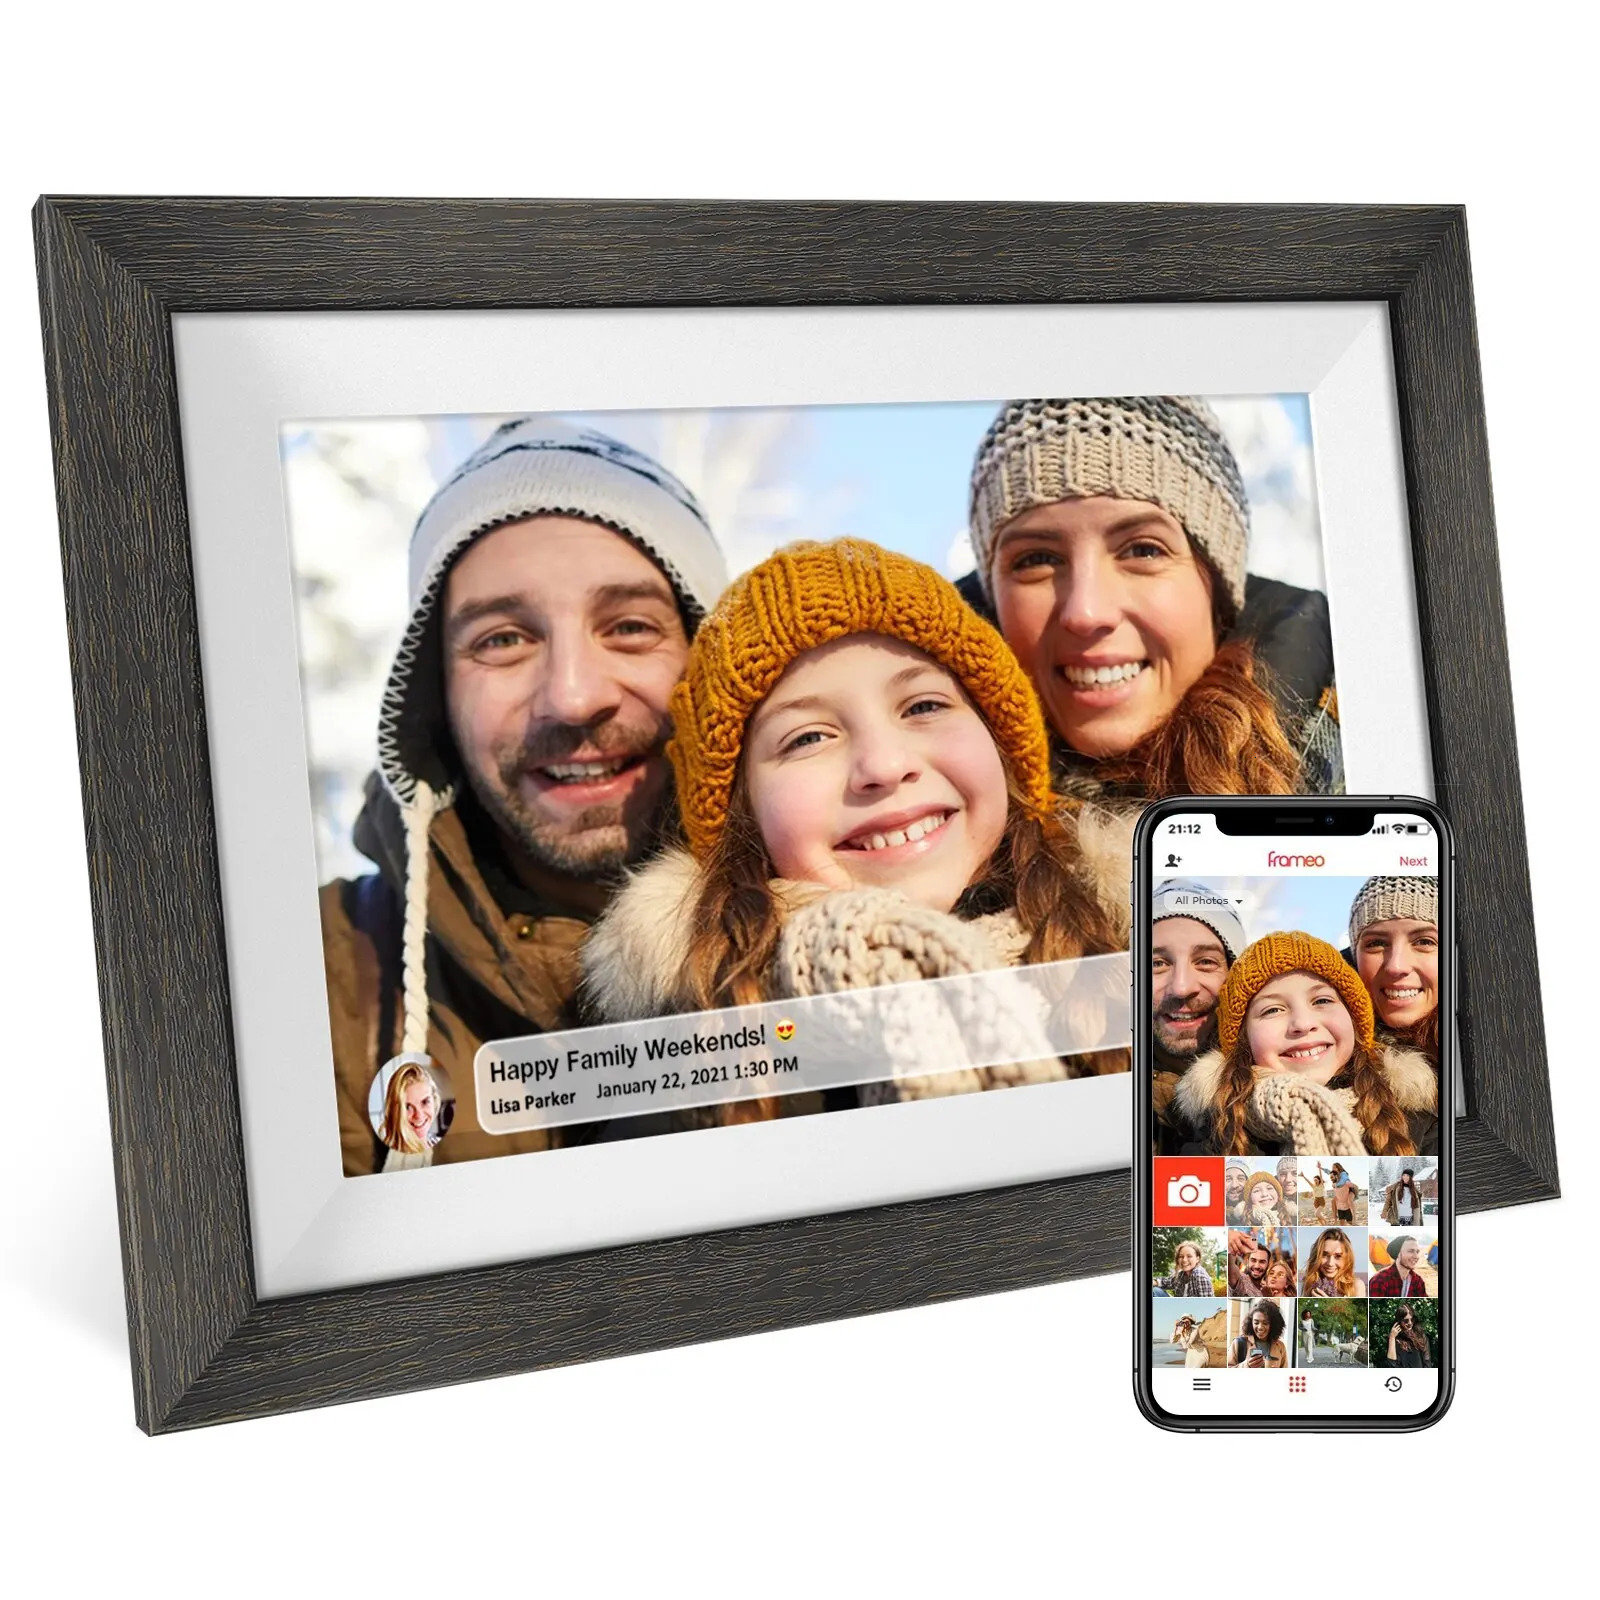 Digital Cameras Frameo 32GB Memory 101 Inch Smart Picture Frame Wood WiFi IPS HD 1080P Electronic Po Touch Screen 231101